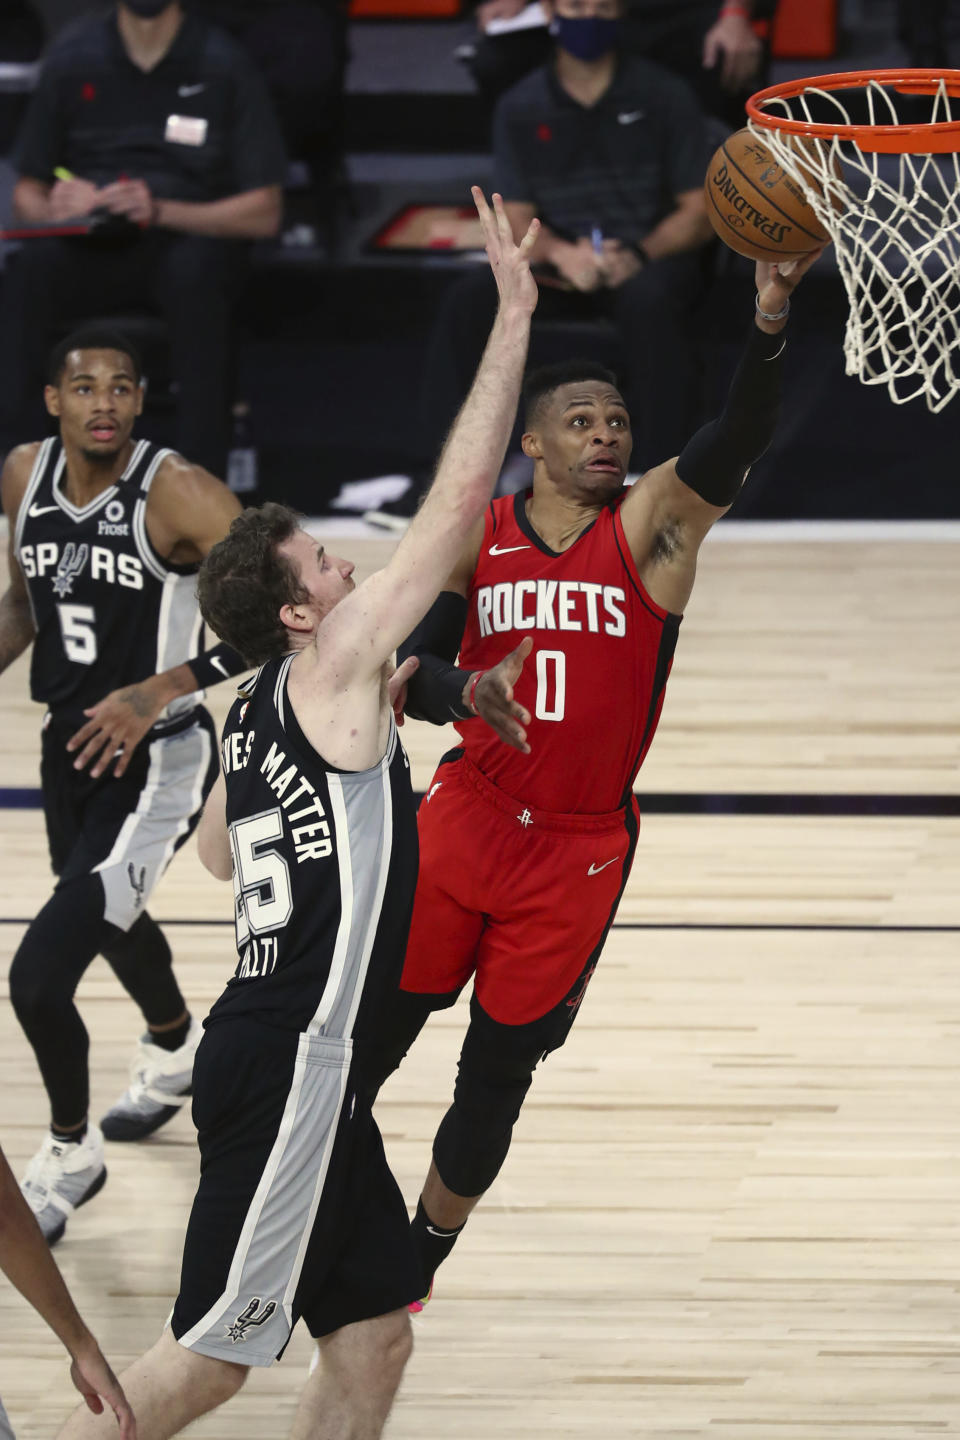 Houston Rockets guard Russell Westbrook (0) goes up for a shot past San Antonio Spurs center Jakob Poeltl (25) during the first half of an NBA basketball game Tuesday, Aug. 11, 2020, in Lake Buena Vista, Fla. (Kim Klement/Pool Photo via AP)